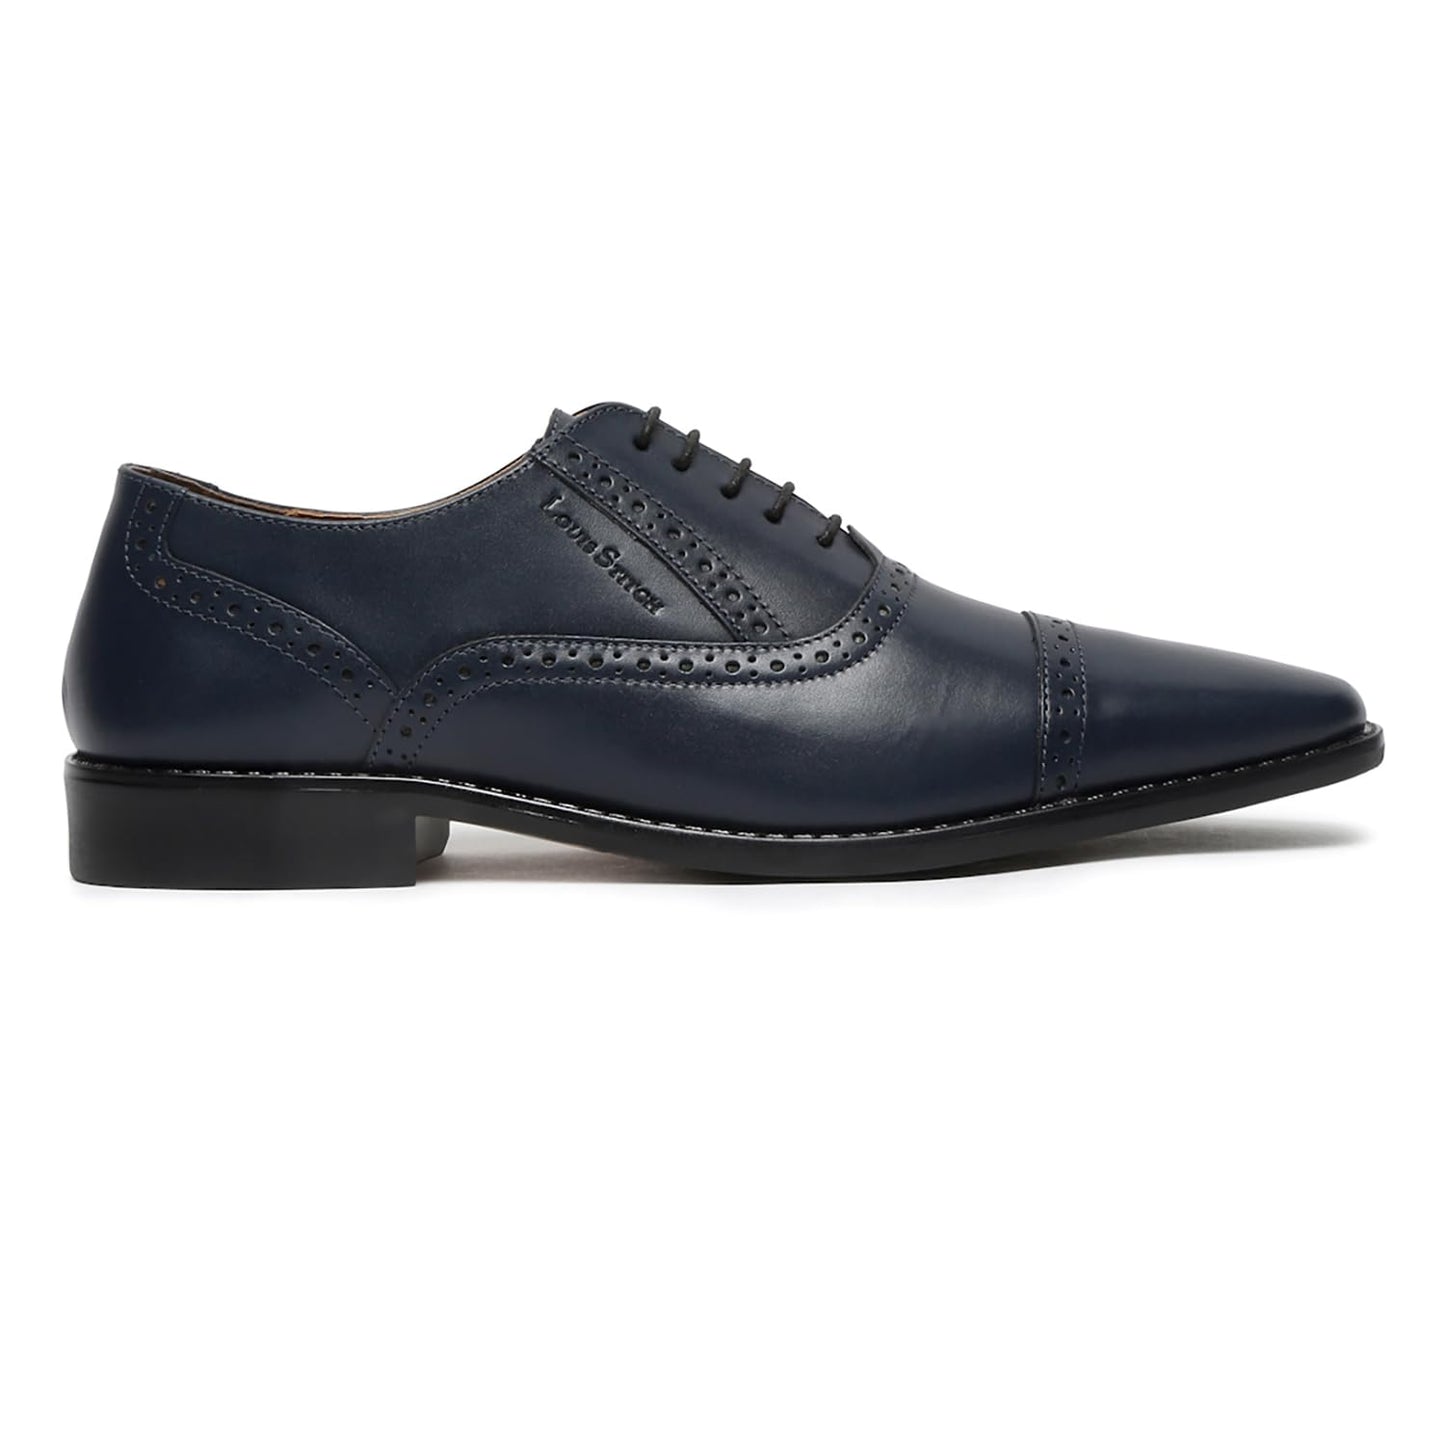 LOUIS STITCH Prussian Blue Italian Leather Handmade Oxford Formal Lace Up Shoe for Men (RXOX) - 8 UK